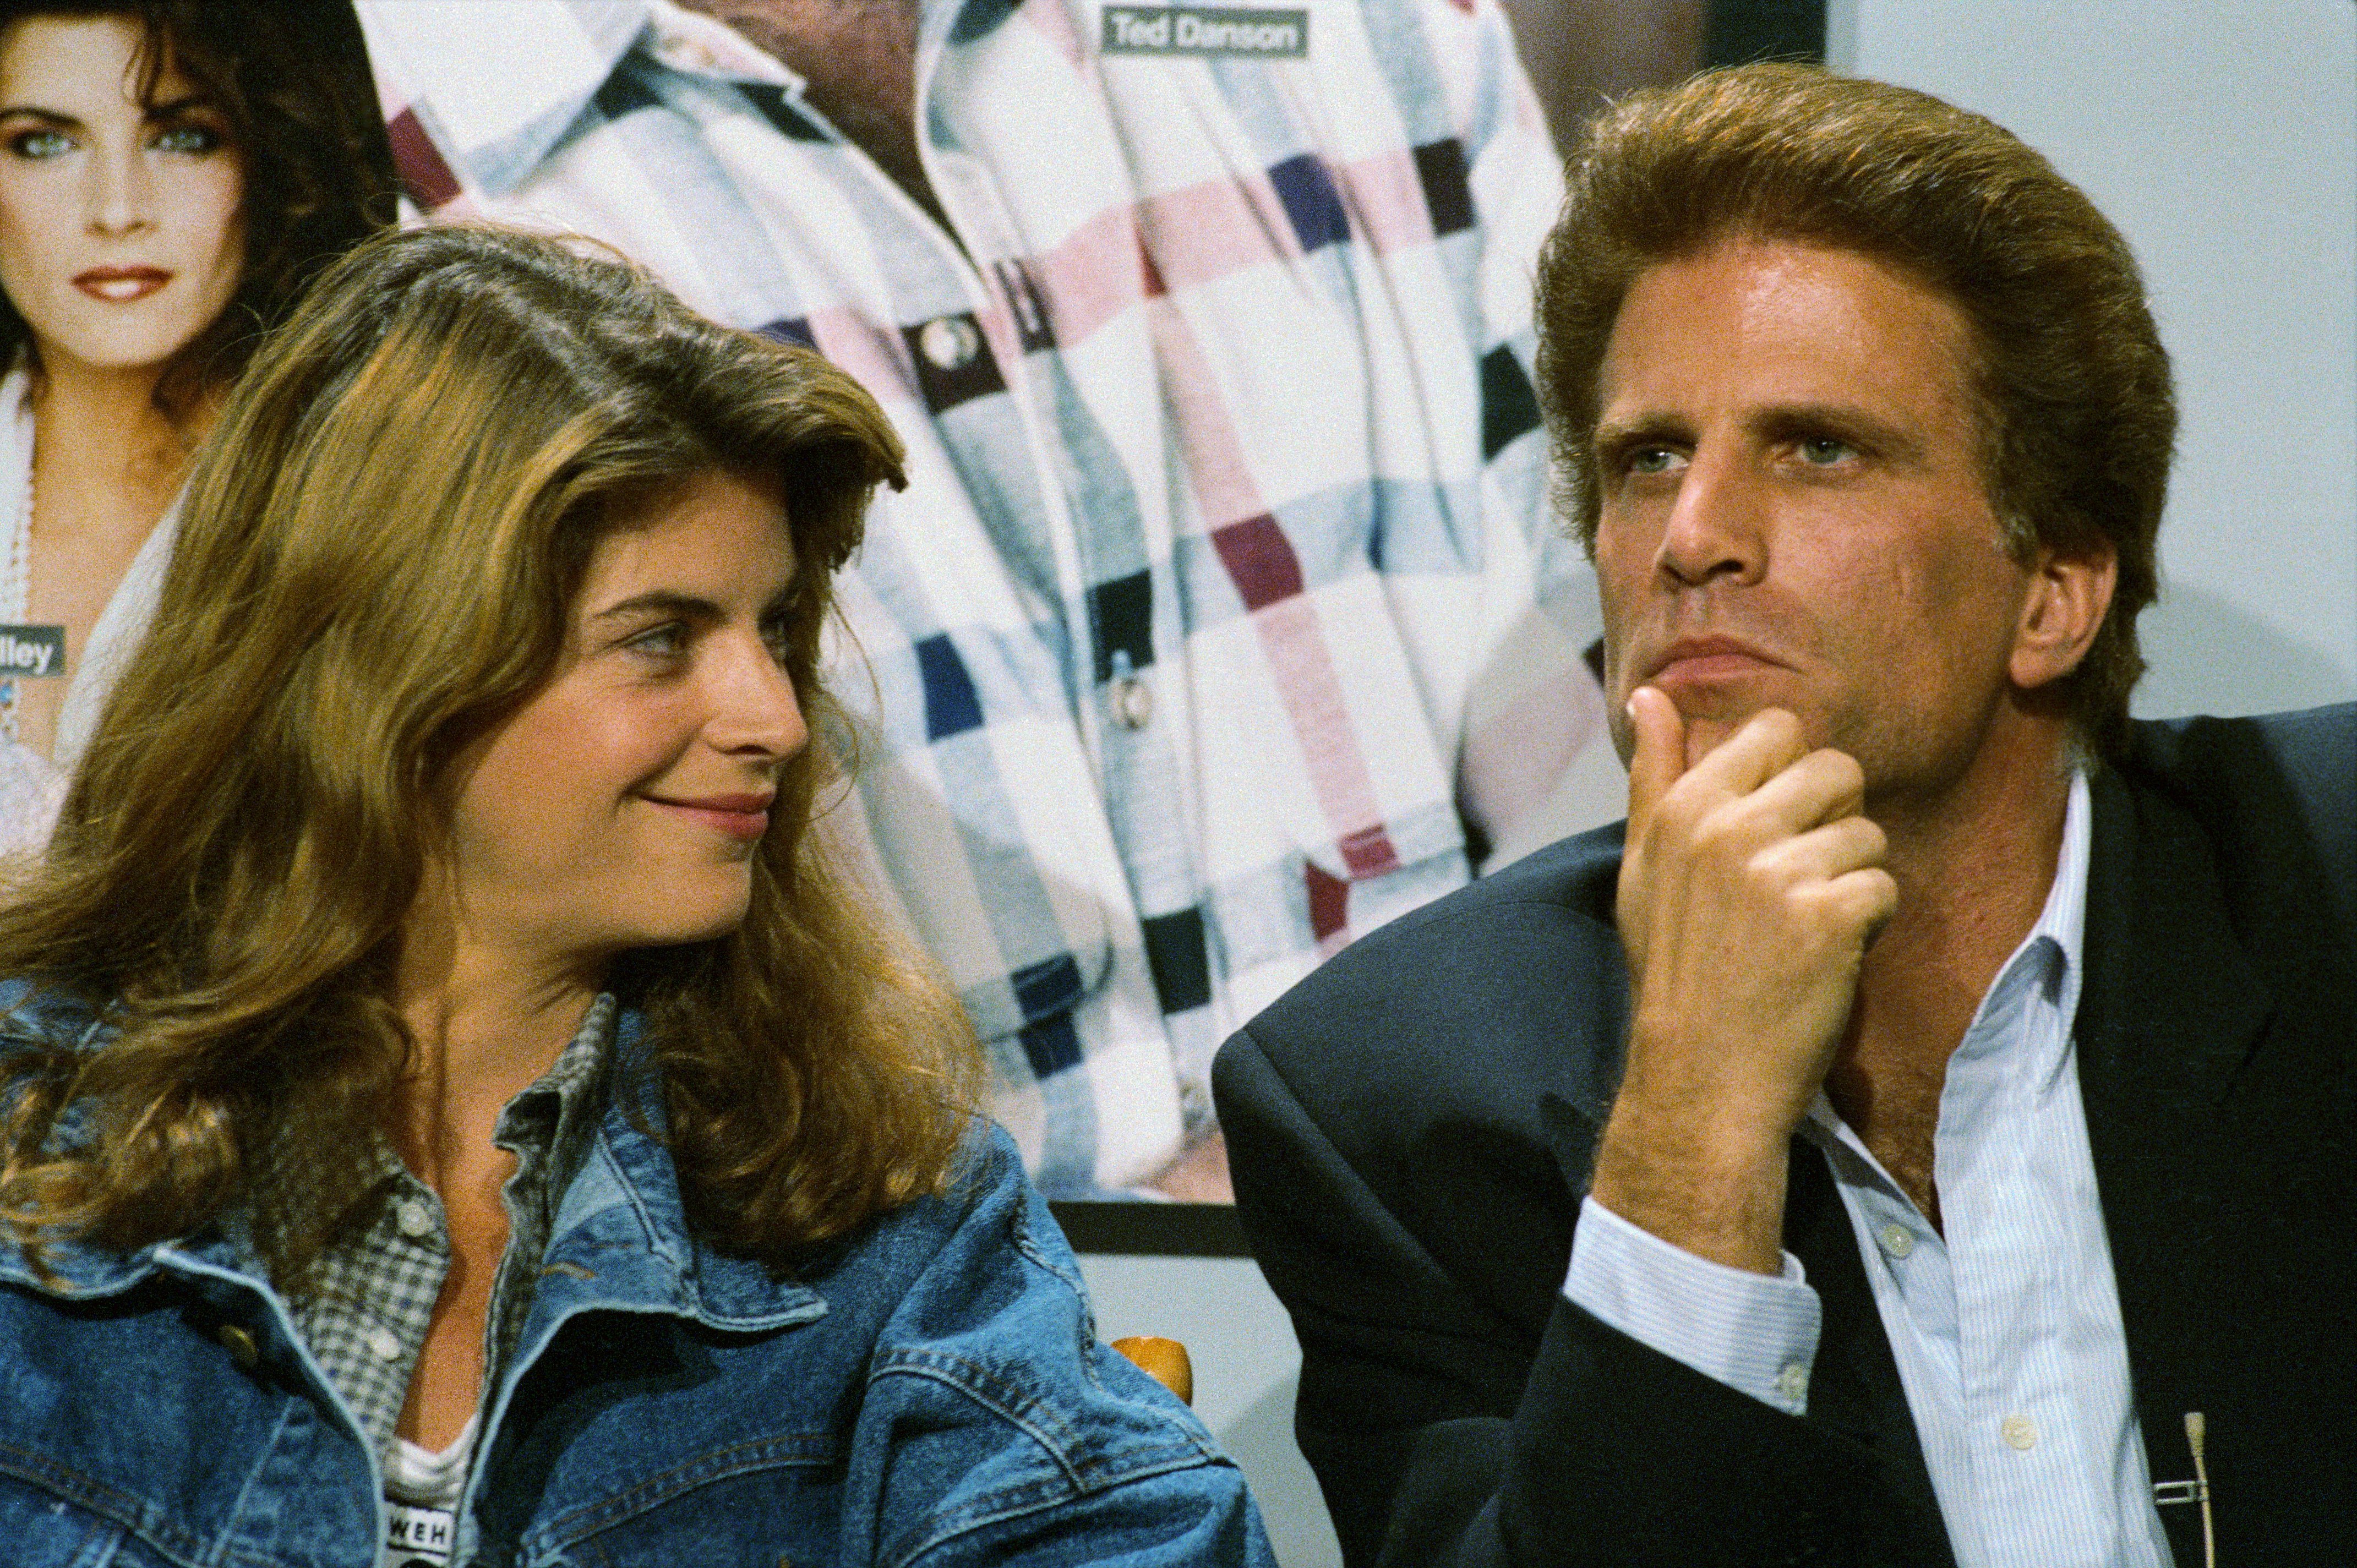 Ted Danson and Kirstie Alley during NBC's press tour 7/27, 1987. | Source: Getty Images